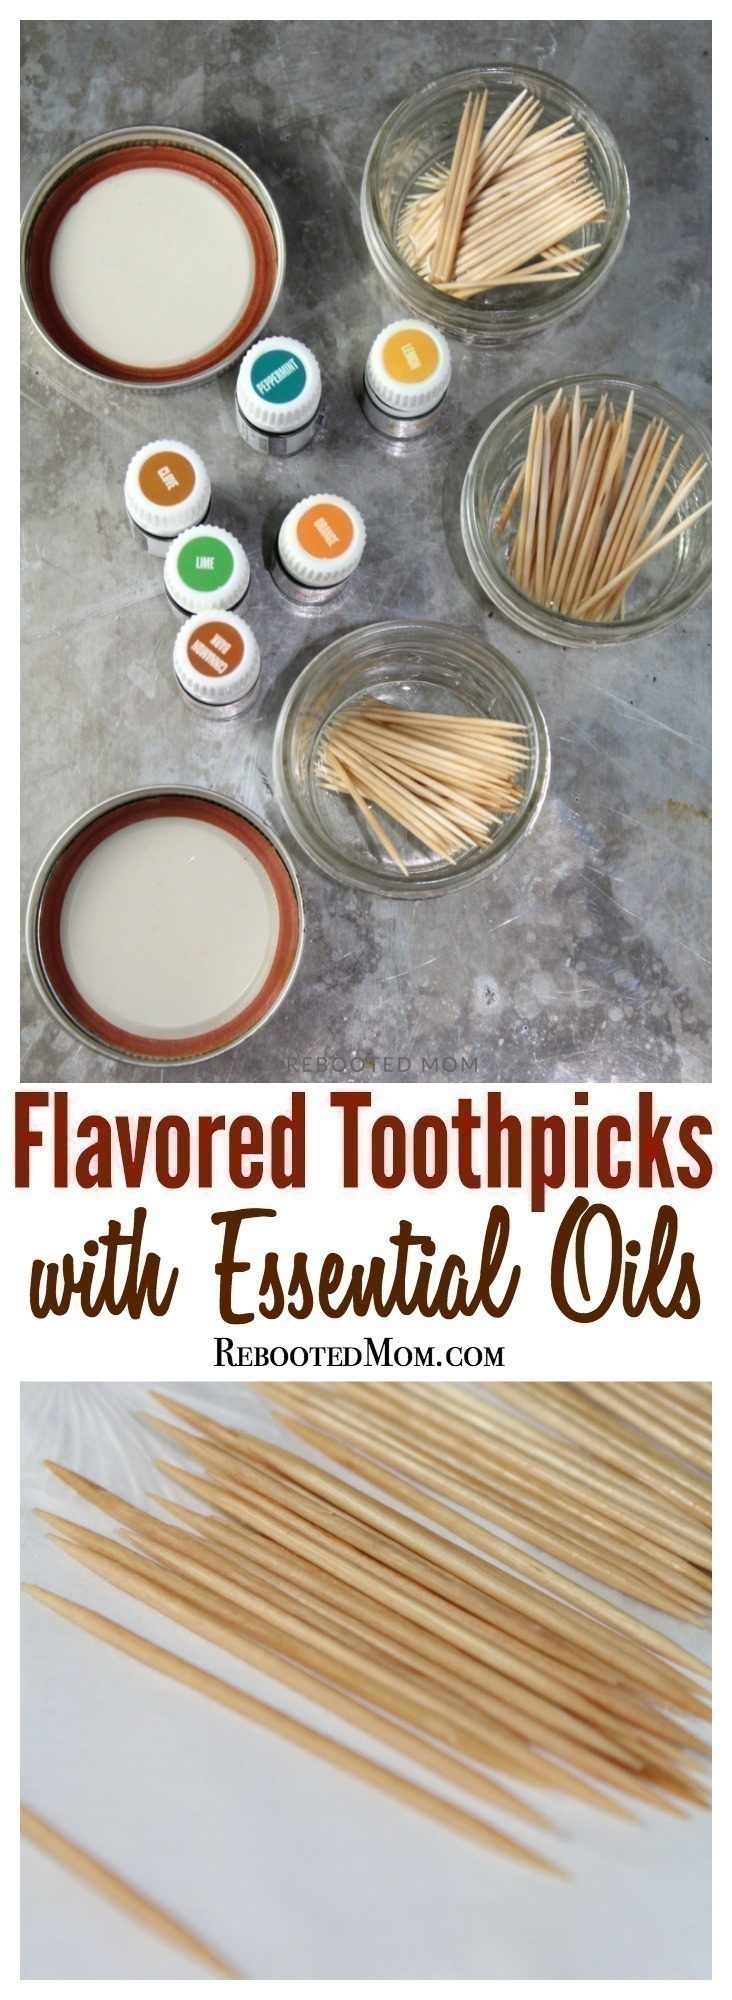 These flavored toothpicks with essential oils are easy to make & the perfect way to curb the urge to snack! Keep them handy in your purse or give as gifts!   #essentialoils #gift #toothpicks 